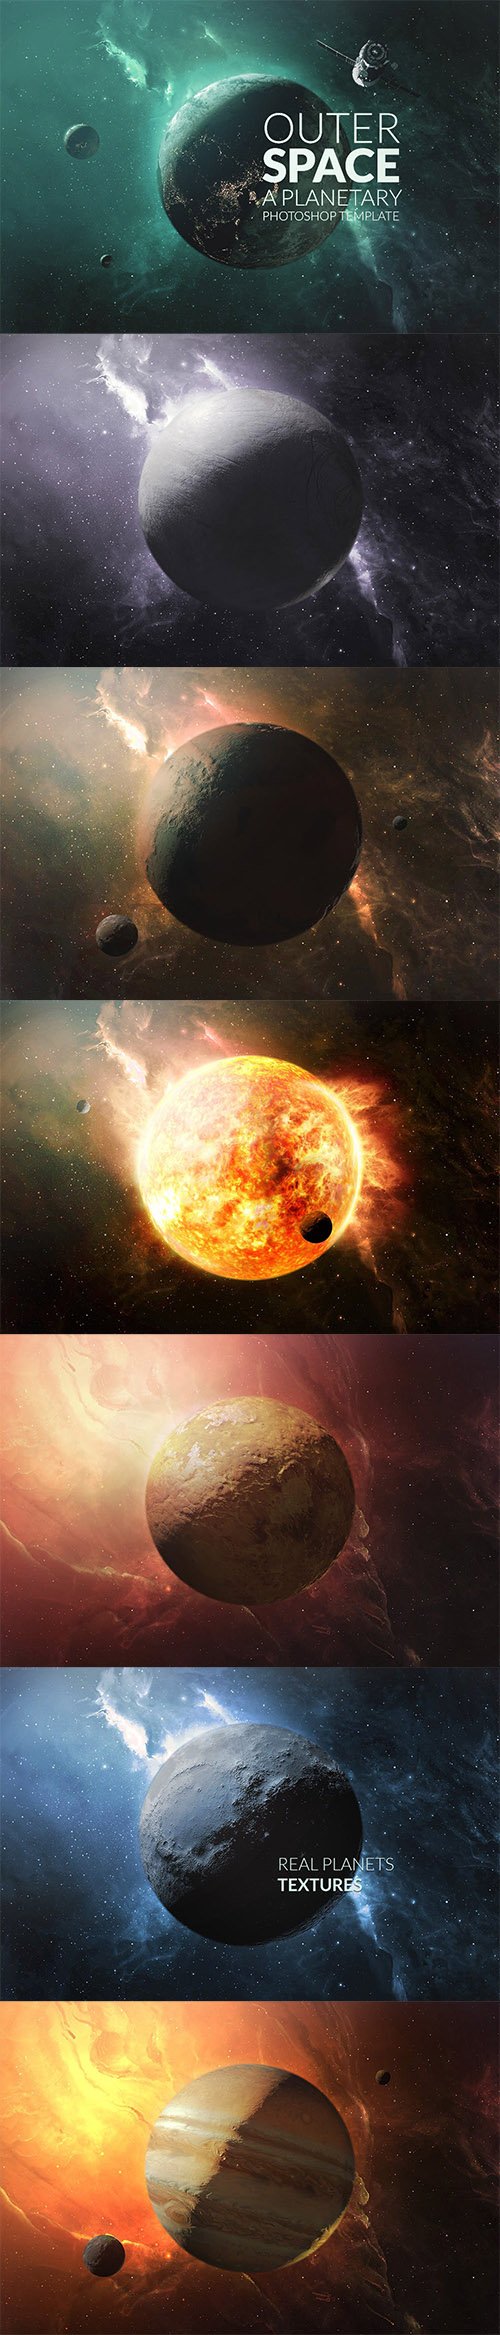 Outer Space Planetary Template PSD